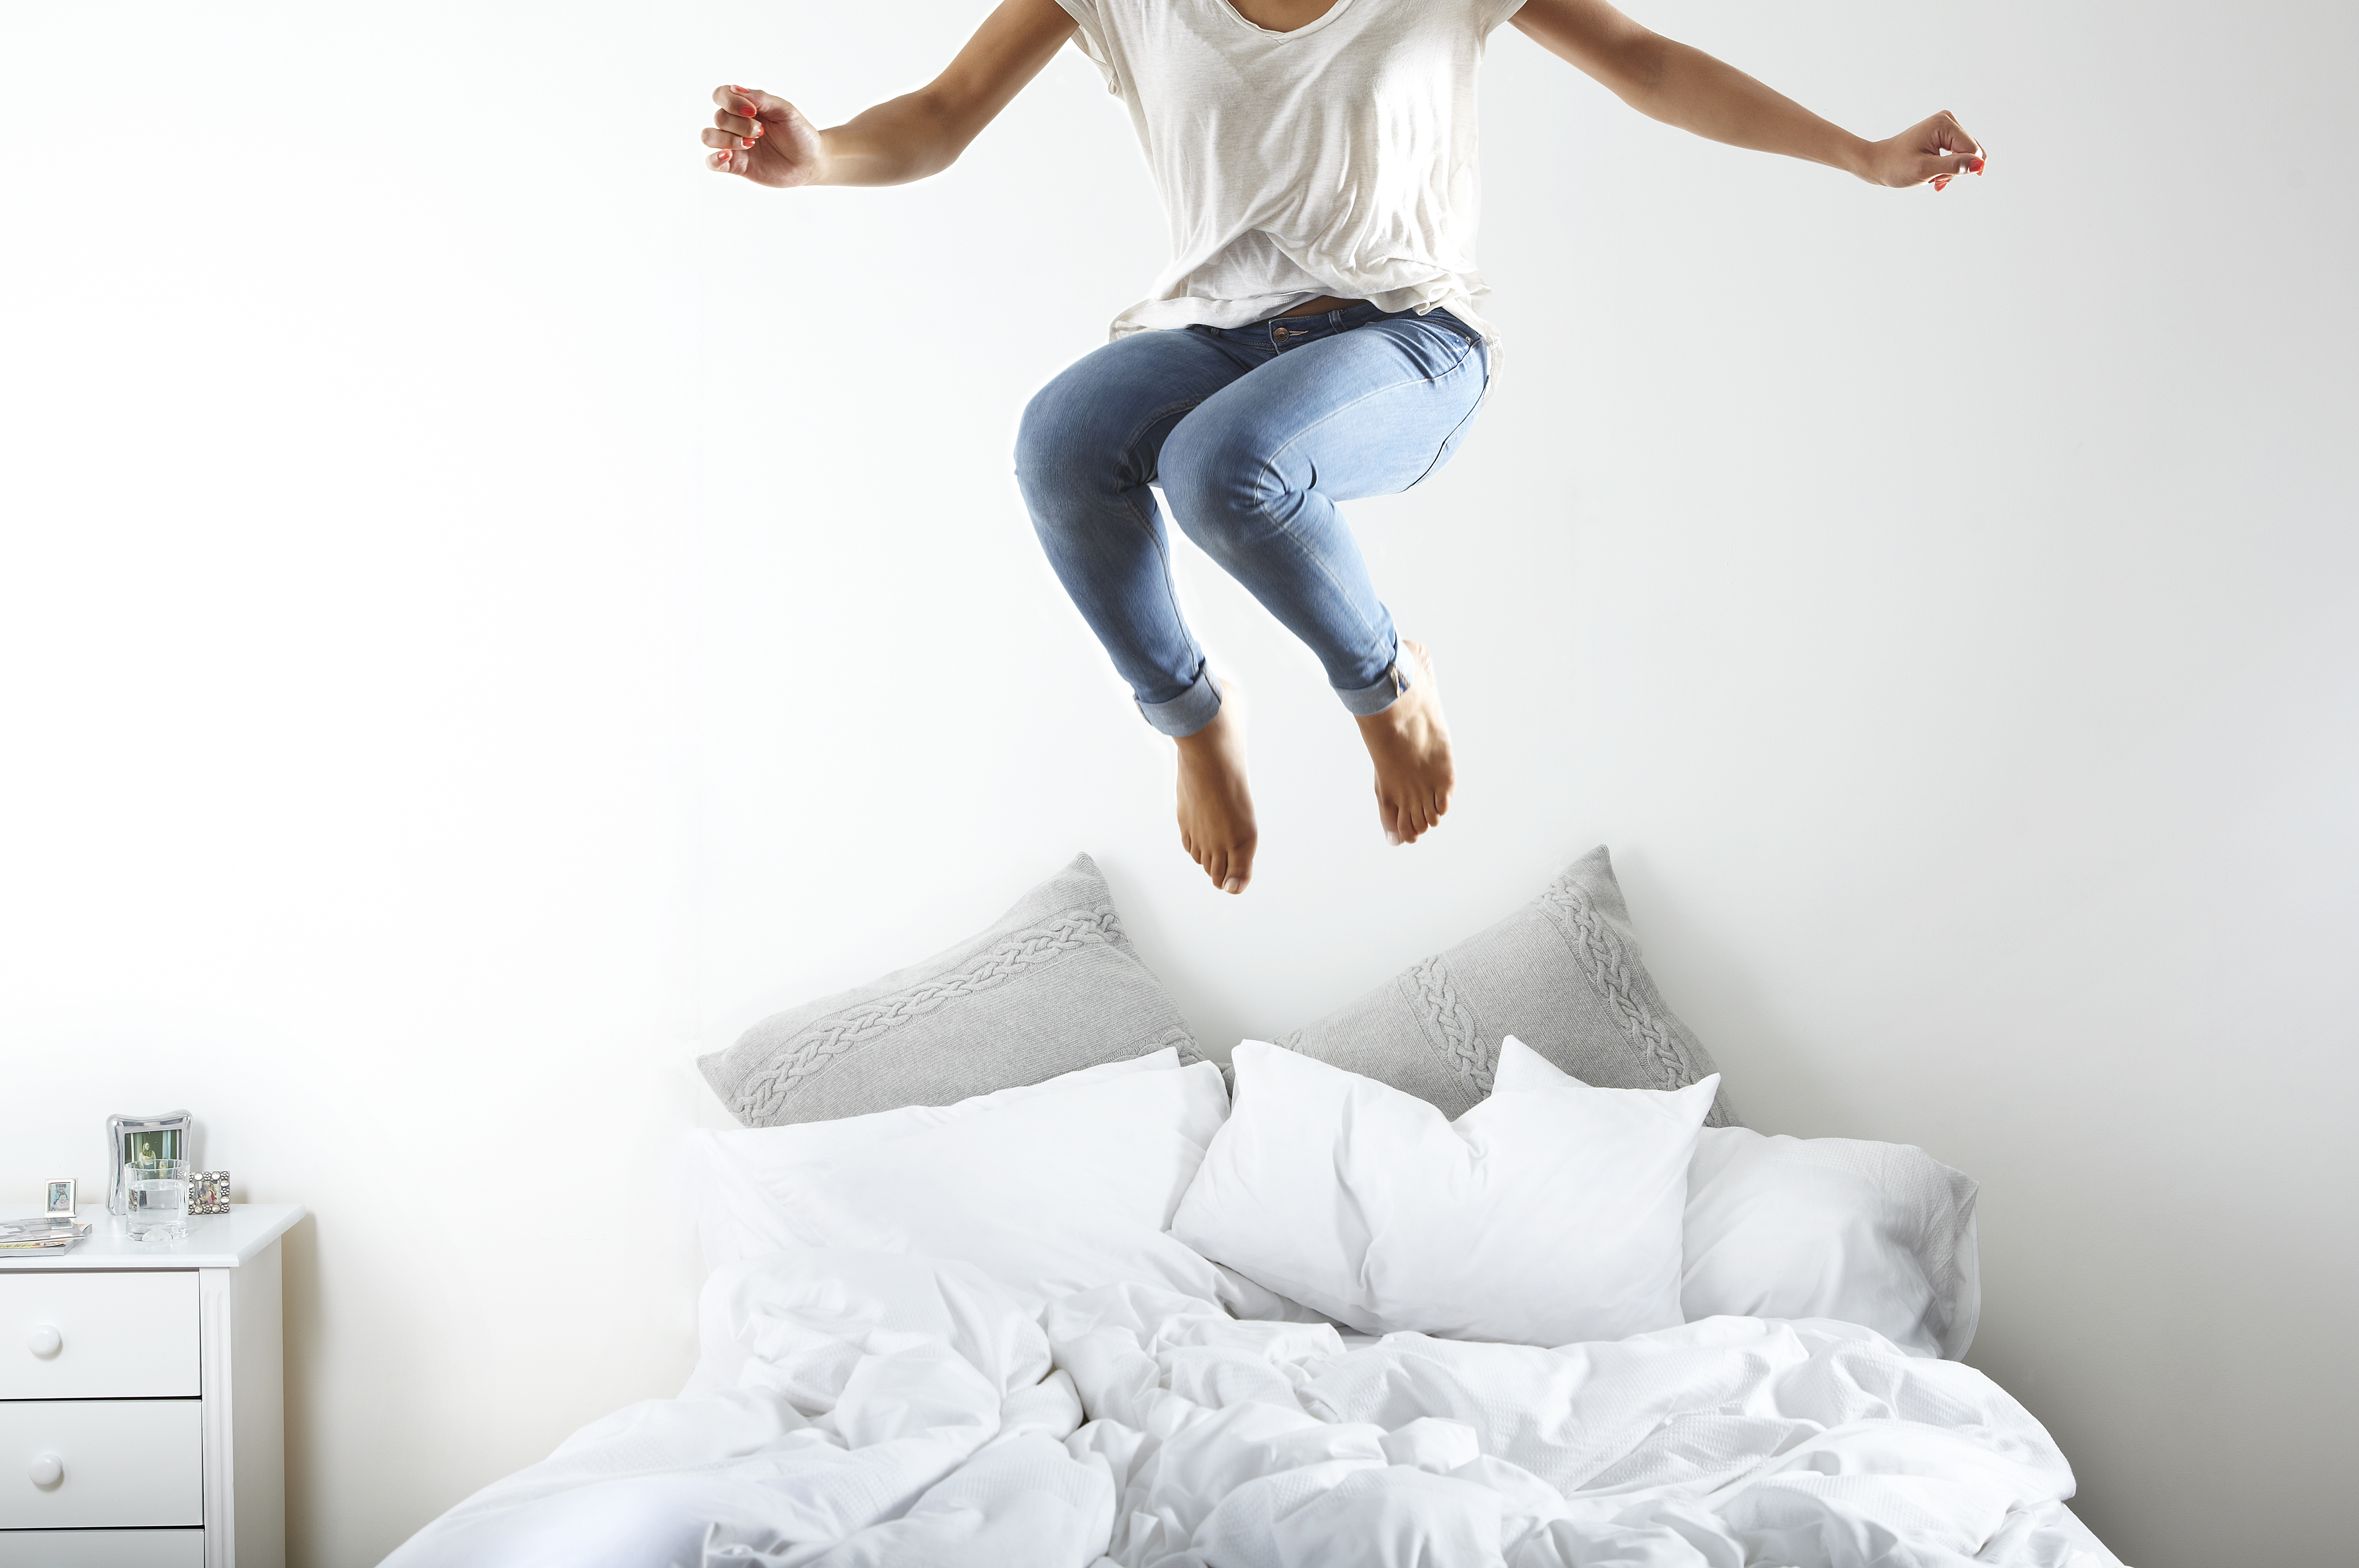 Portrait of woman jumping on bed | Source: Getty Images